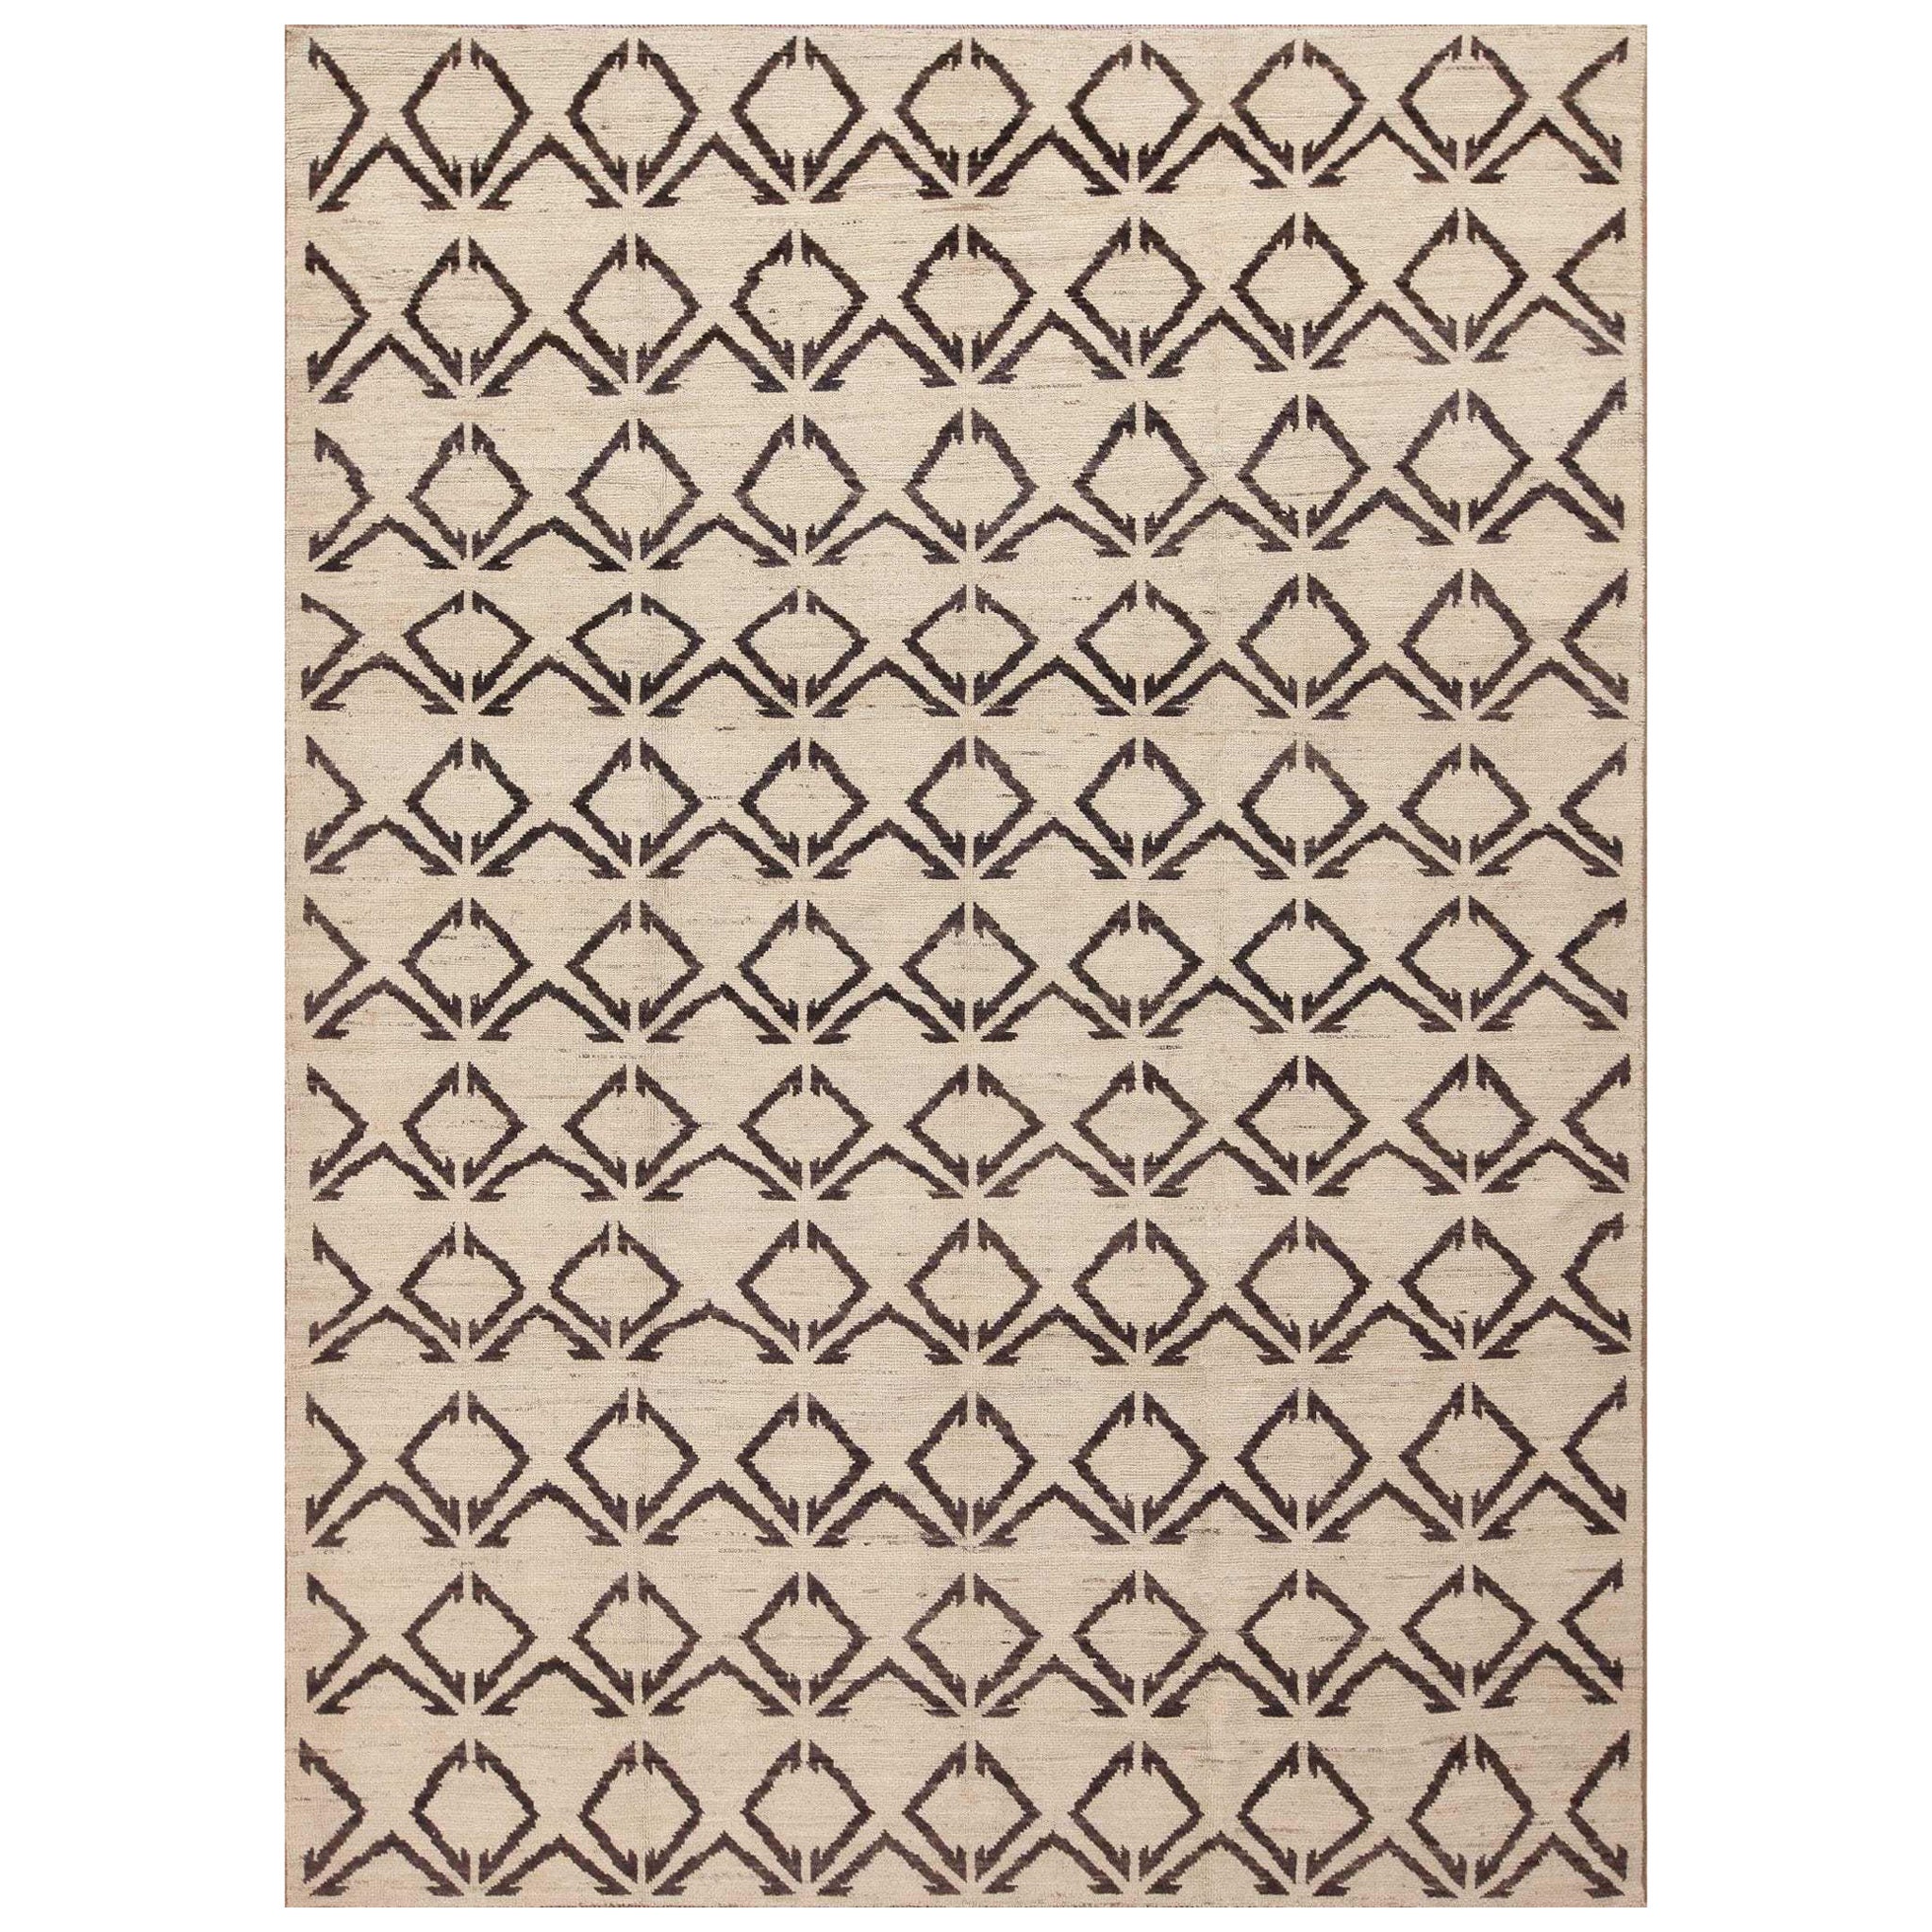 Nazmiyal Collection Modern Moroccan Berber Beni Ourain Design Rug 7'3" x 10'2" For Sale